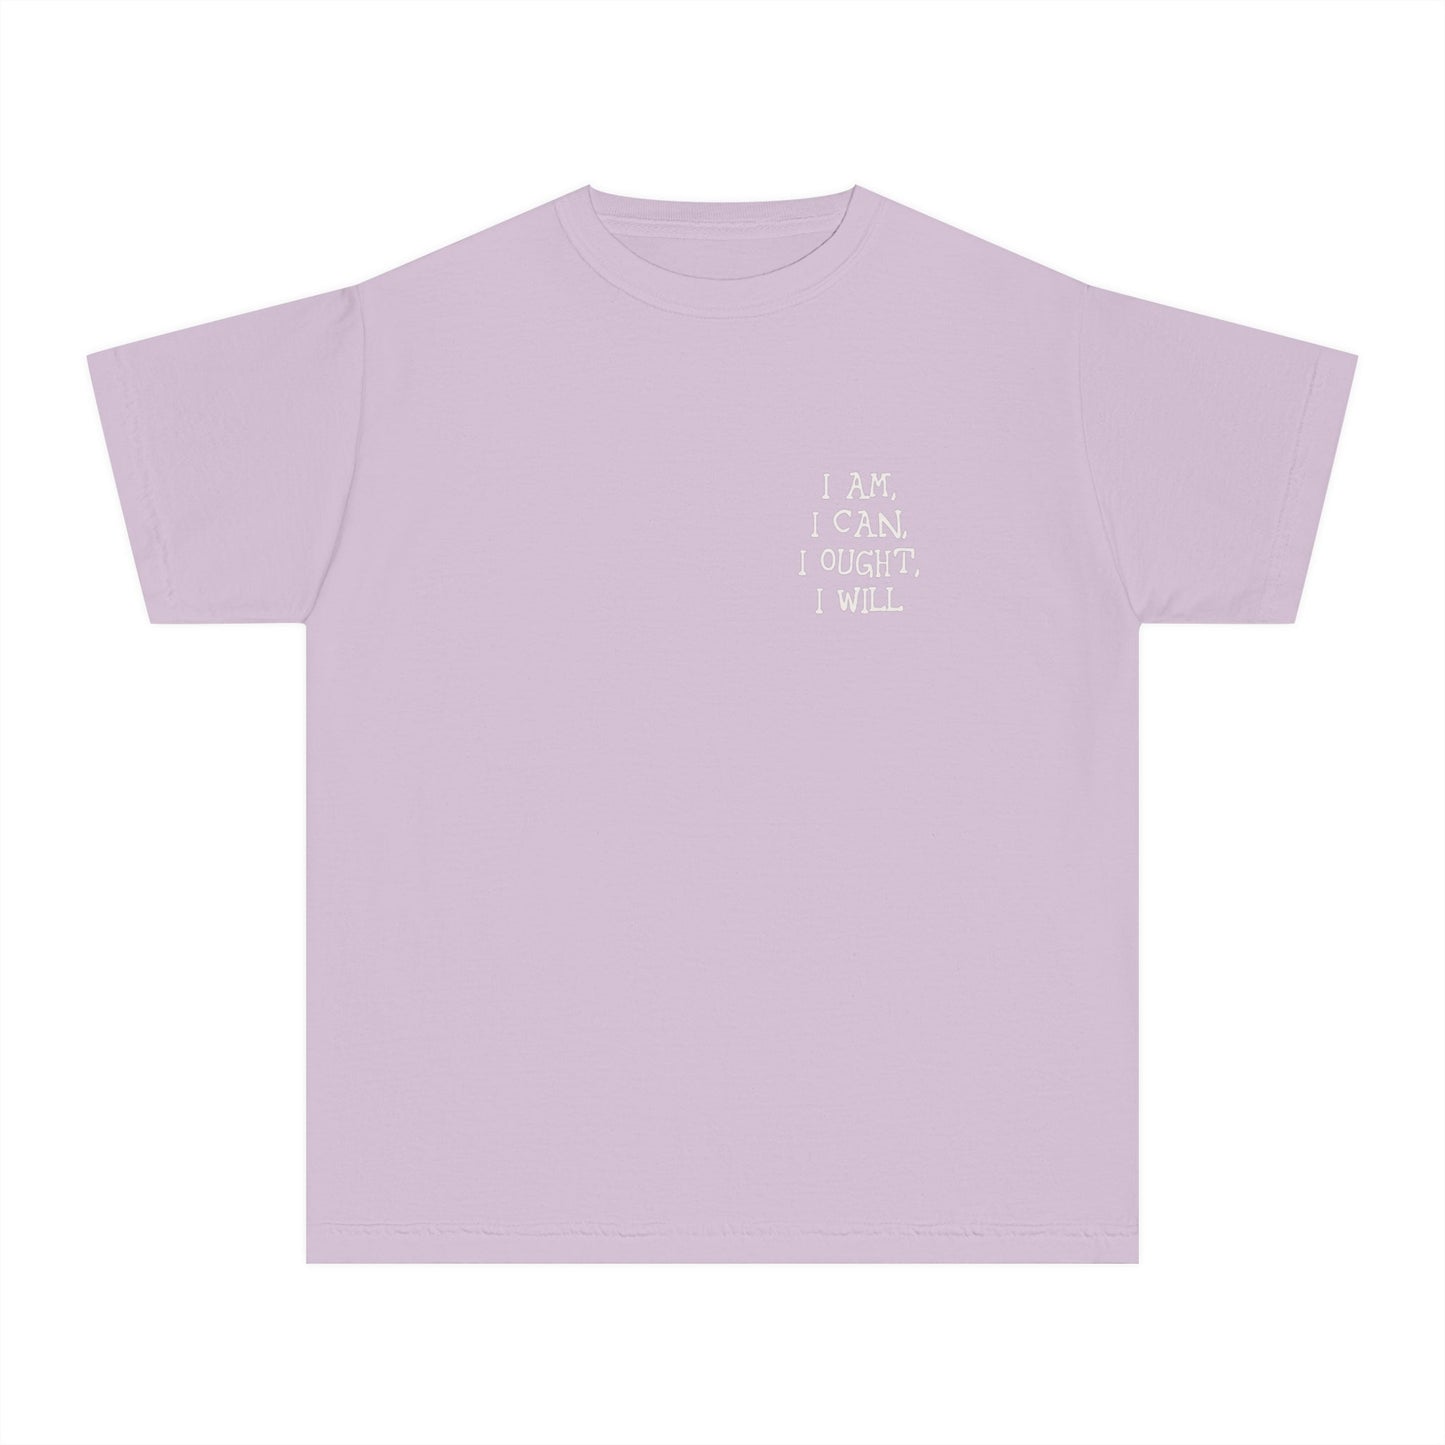 Kids ShirtWolfe Paw DesignsKids ShirtFront and back displays part of a quote from Charlotte Mason.
 
100% combed ringspun cottonComfort  Colors Unise Fit



 
XS
S
M
L
XL




Width, in
13.50
14.50
16.50I am, I can, I ought, I will Kids Shirt